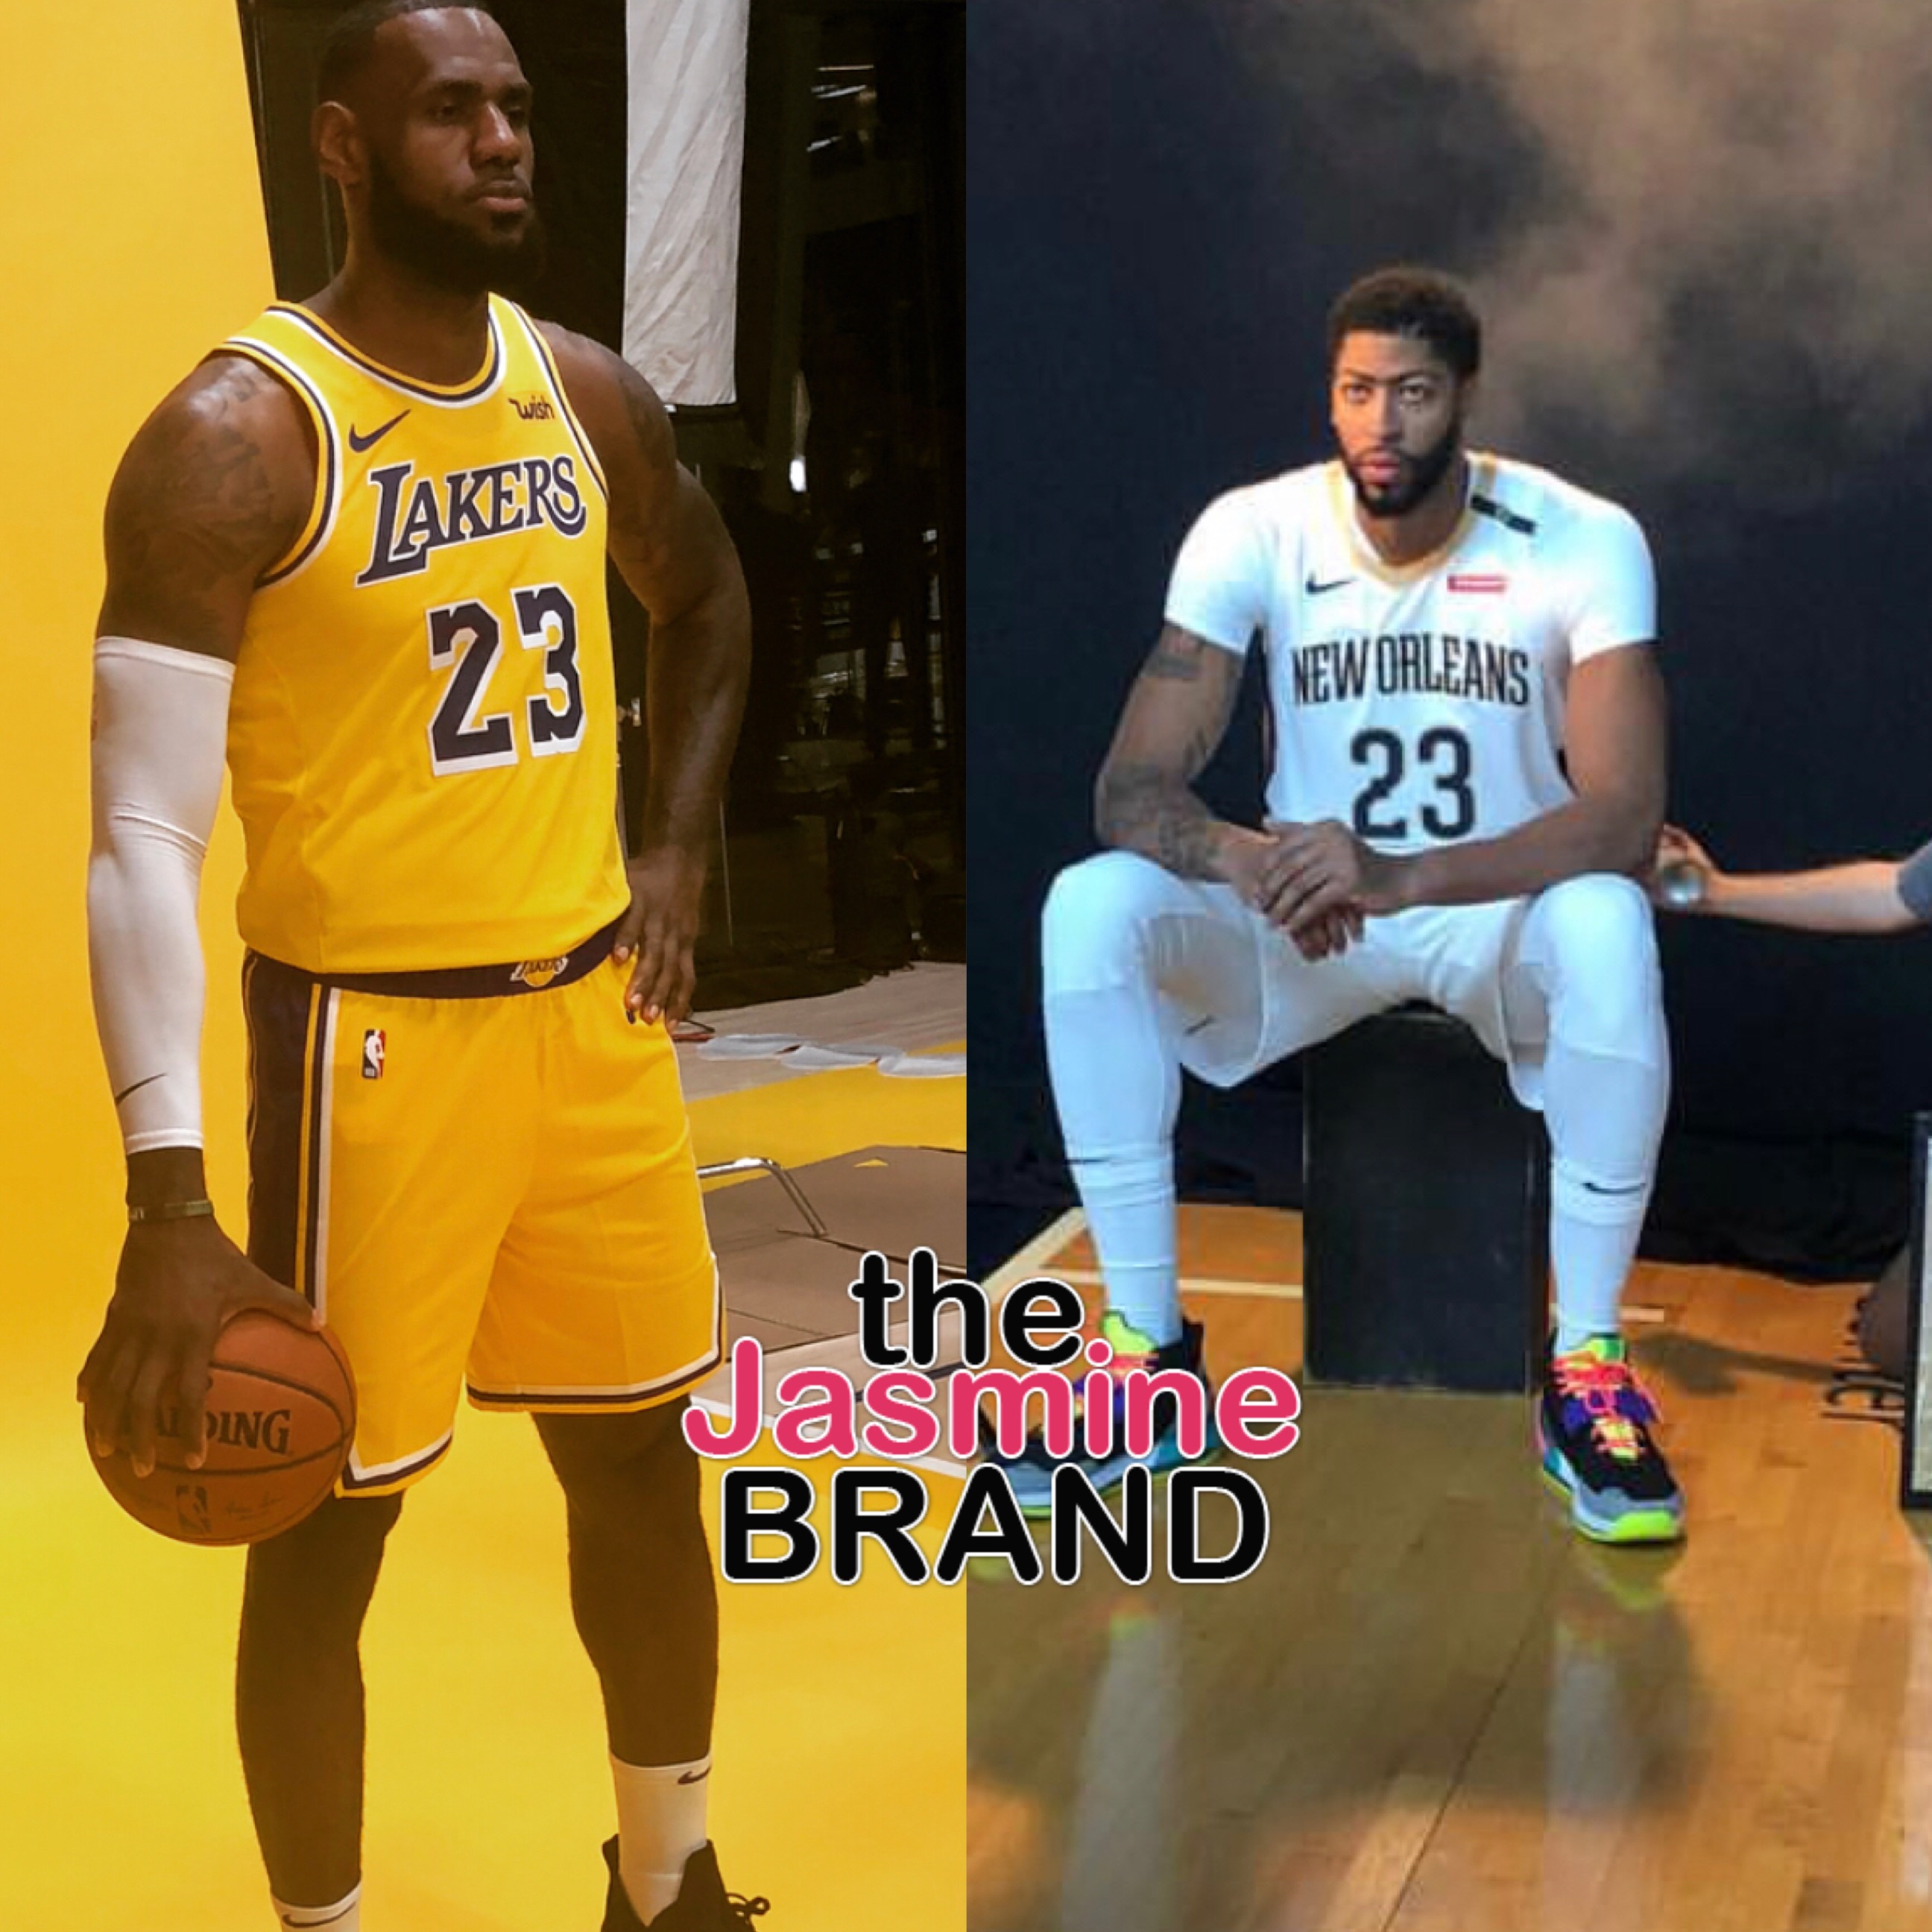 Lakers' LeBron James Will Give Anthony Davis No. 23 Jersey for